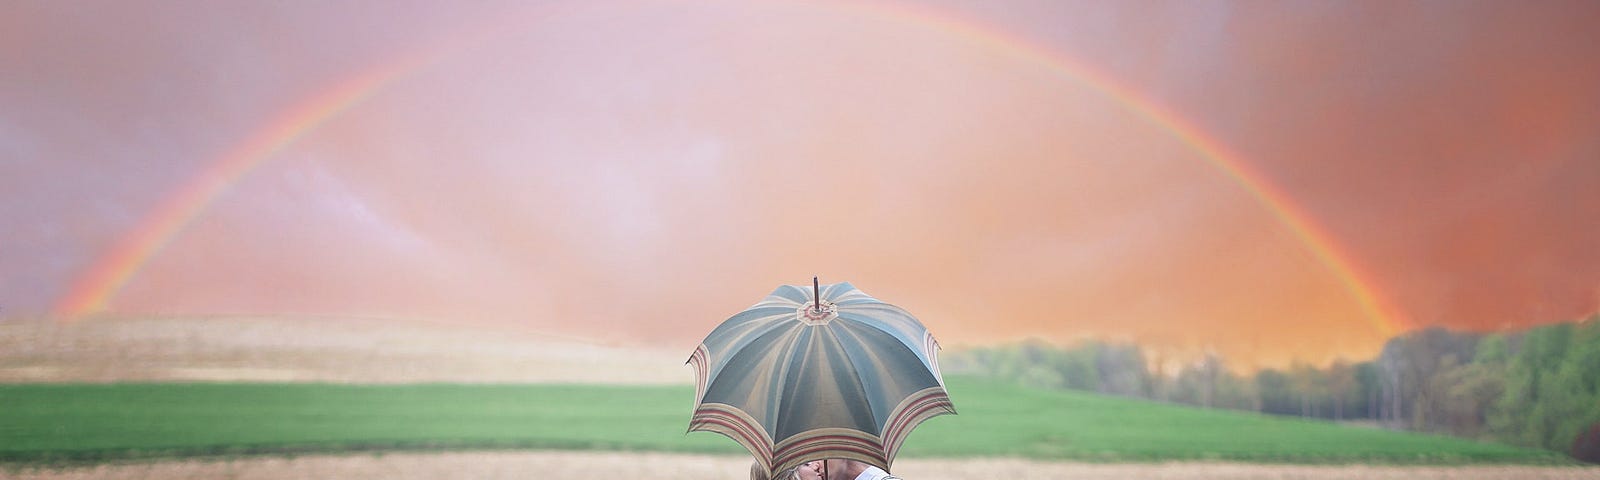 Couple kissing while holding an umbrella in a field with a rainbow in the background.